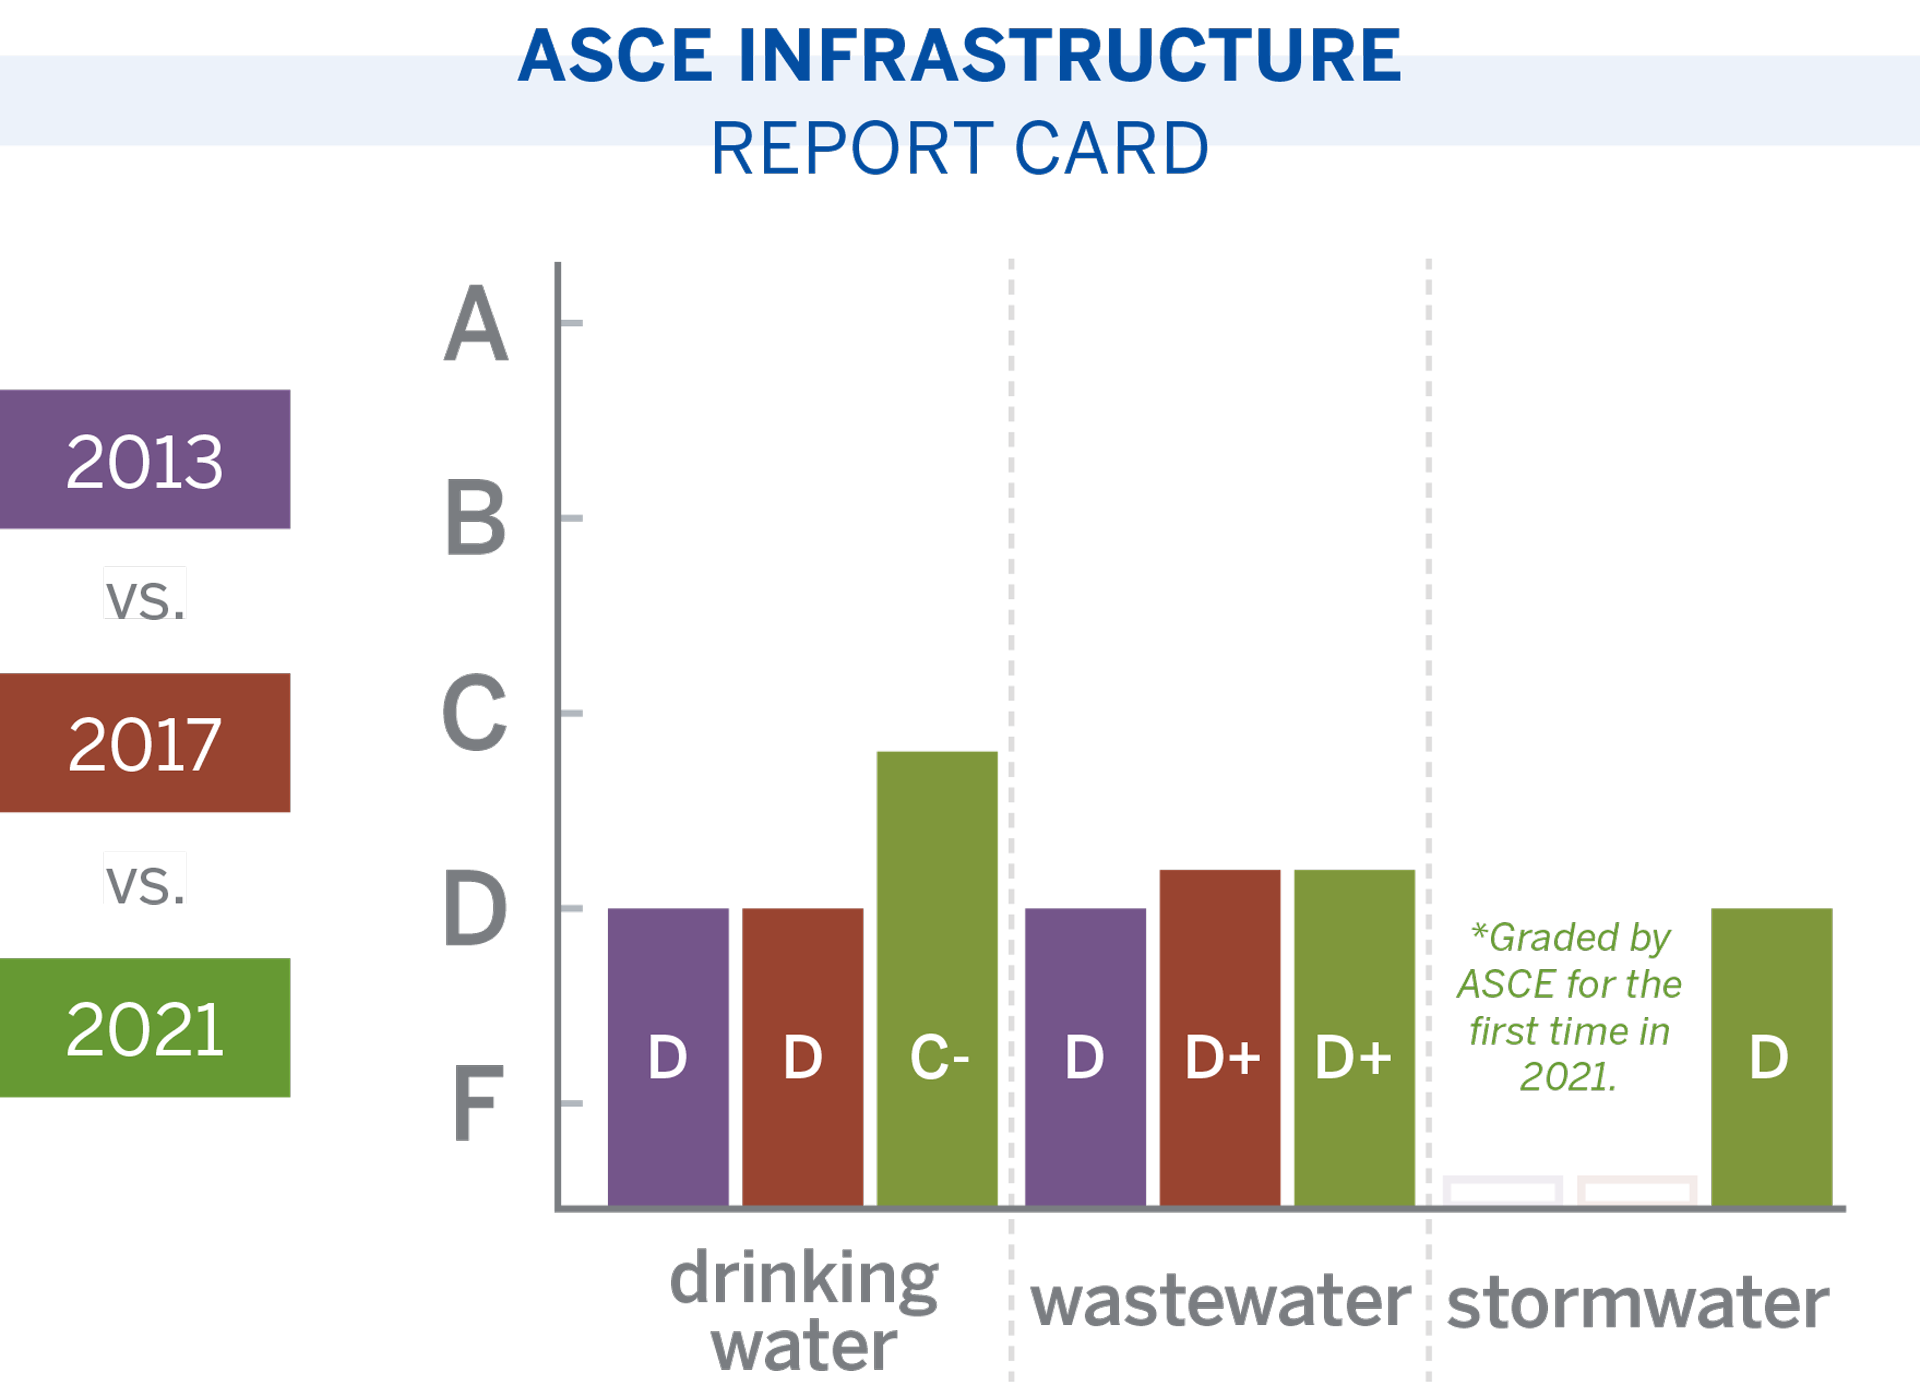 ASCE infrastructure report card chart